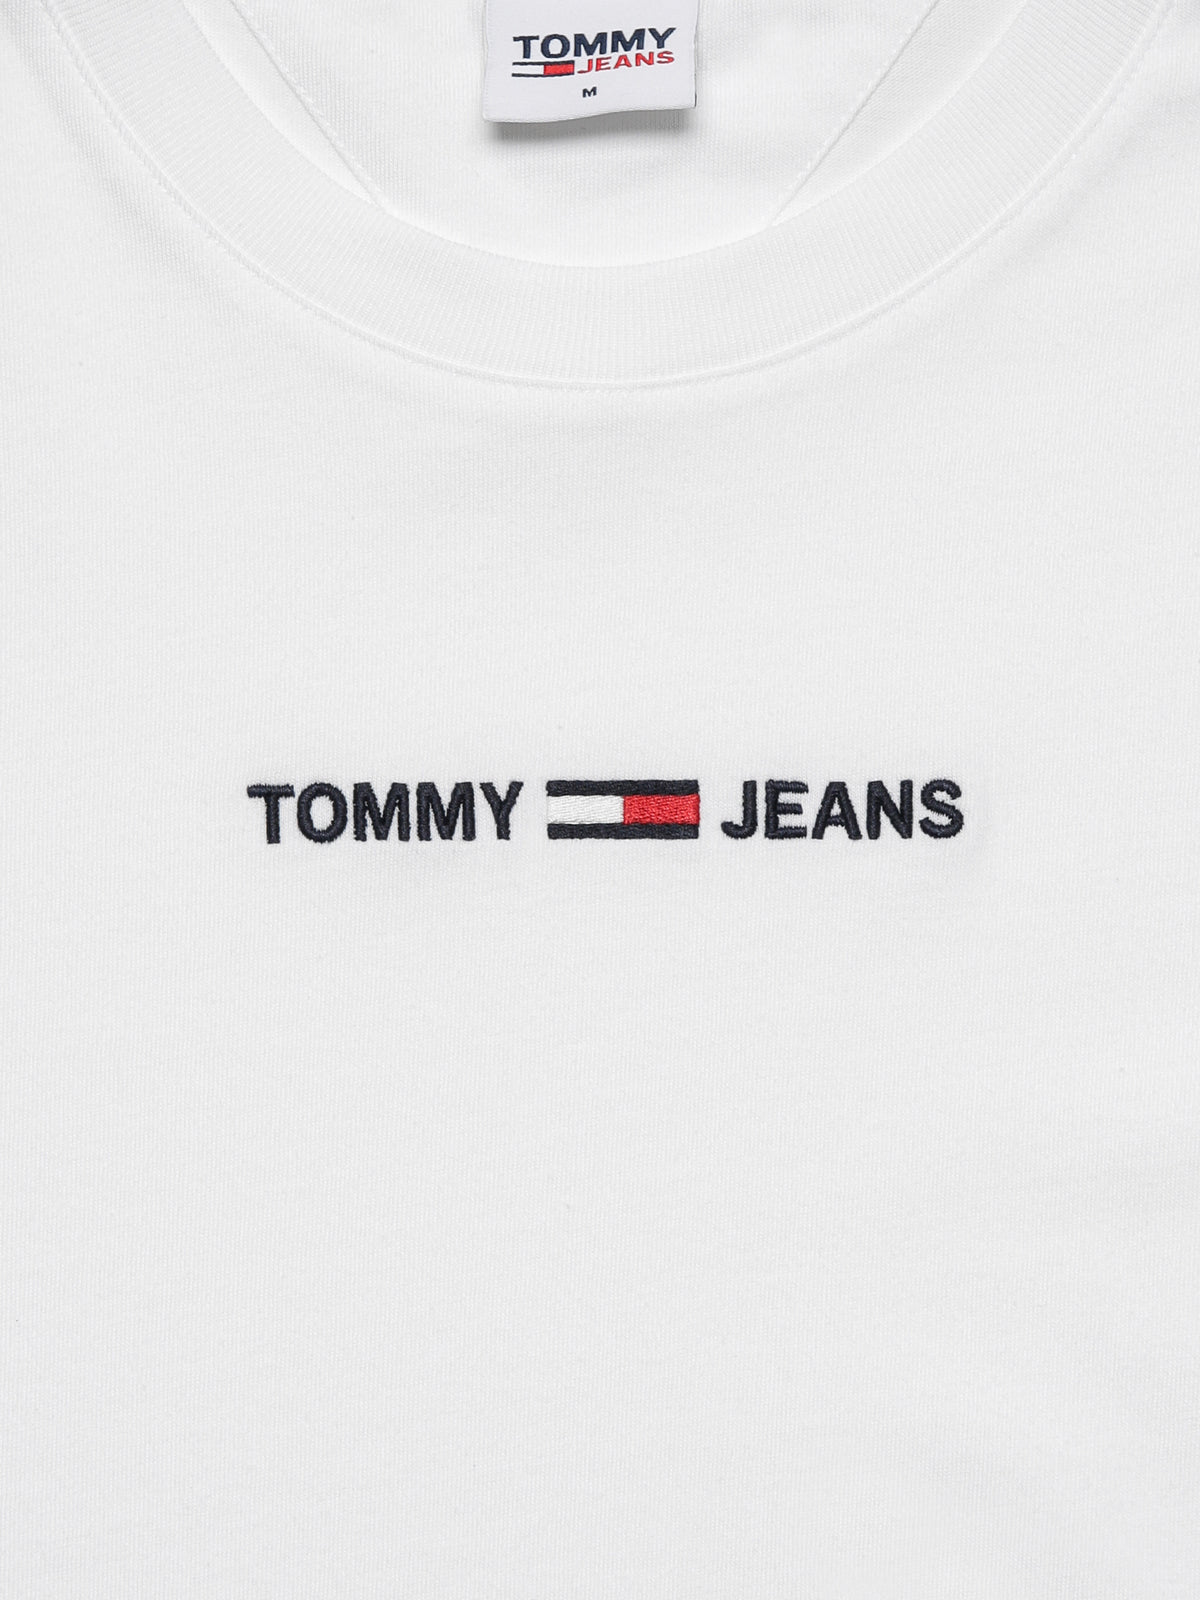 Small Text T-Shirt in White